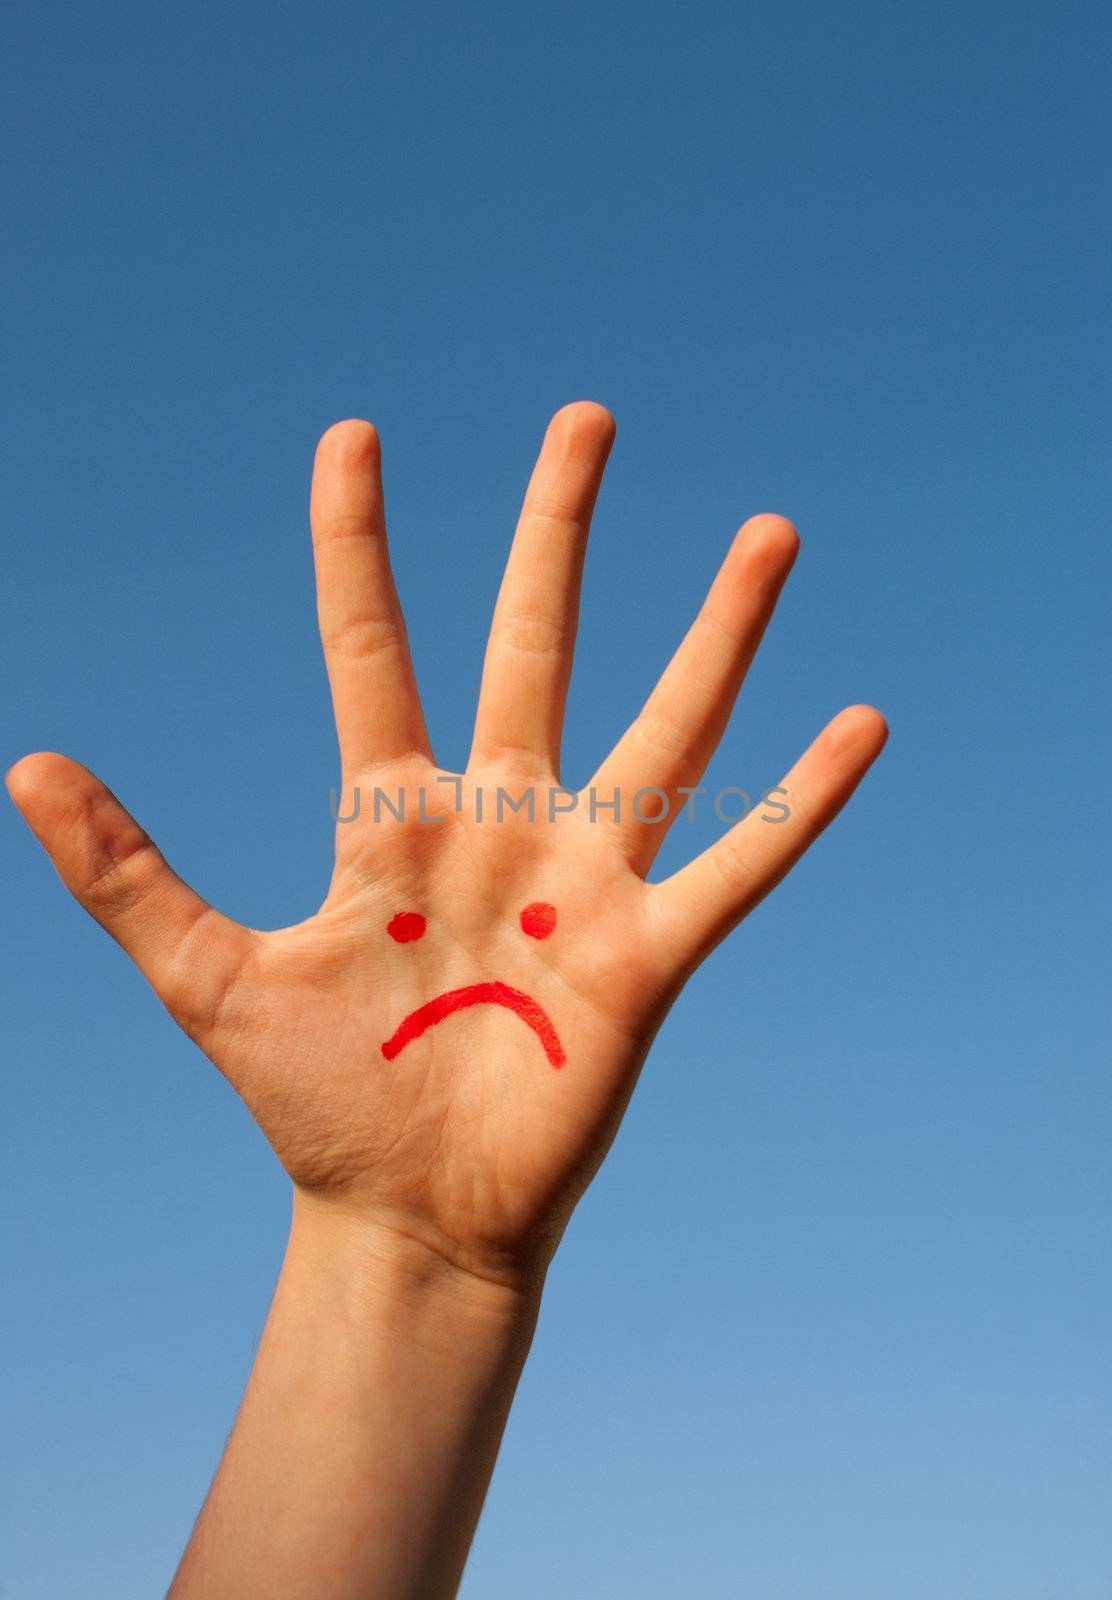 Human's palm with unhappy smiley drawn on it